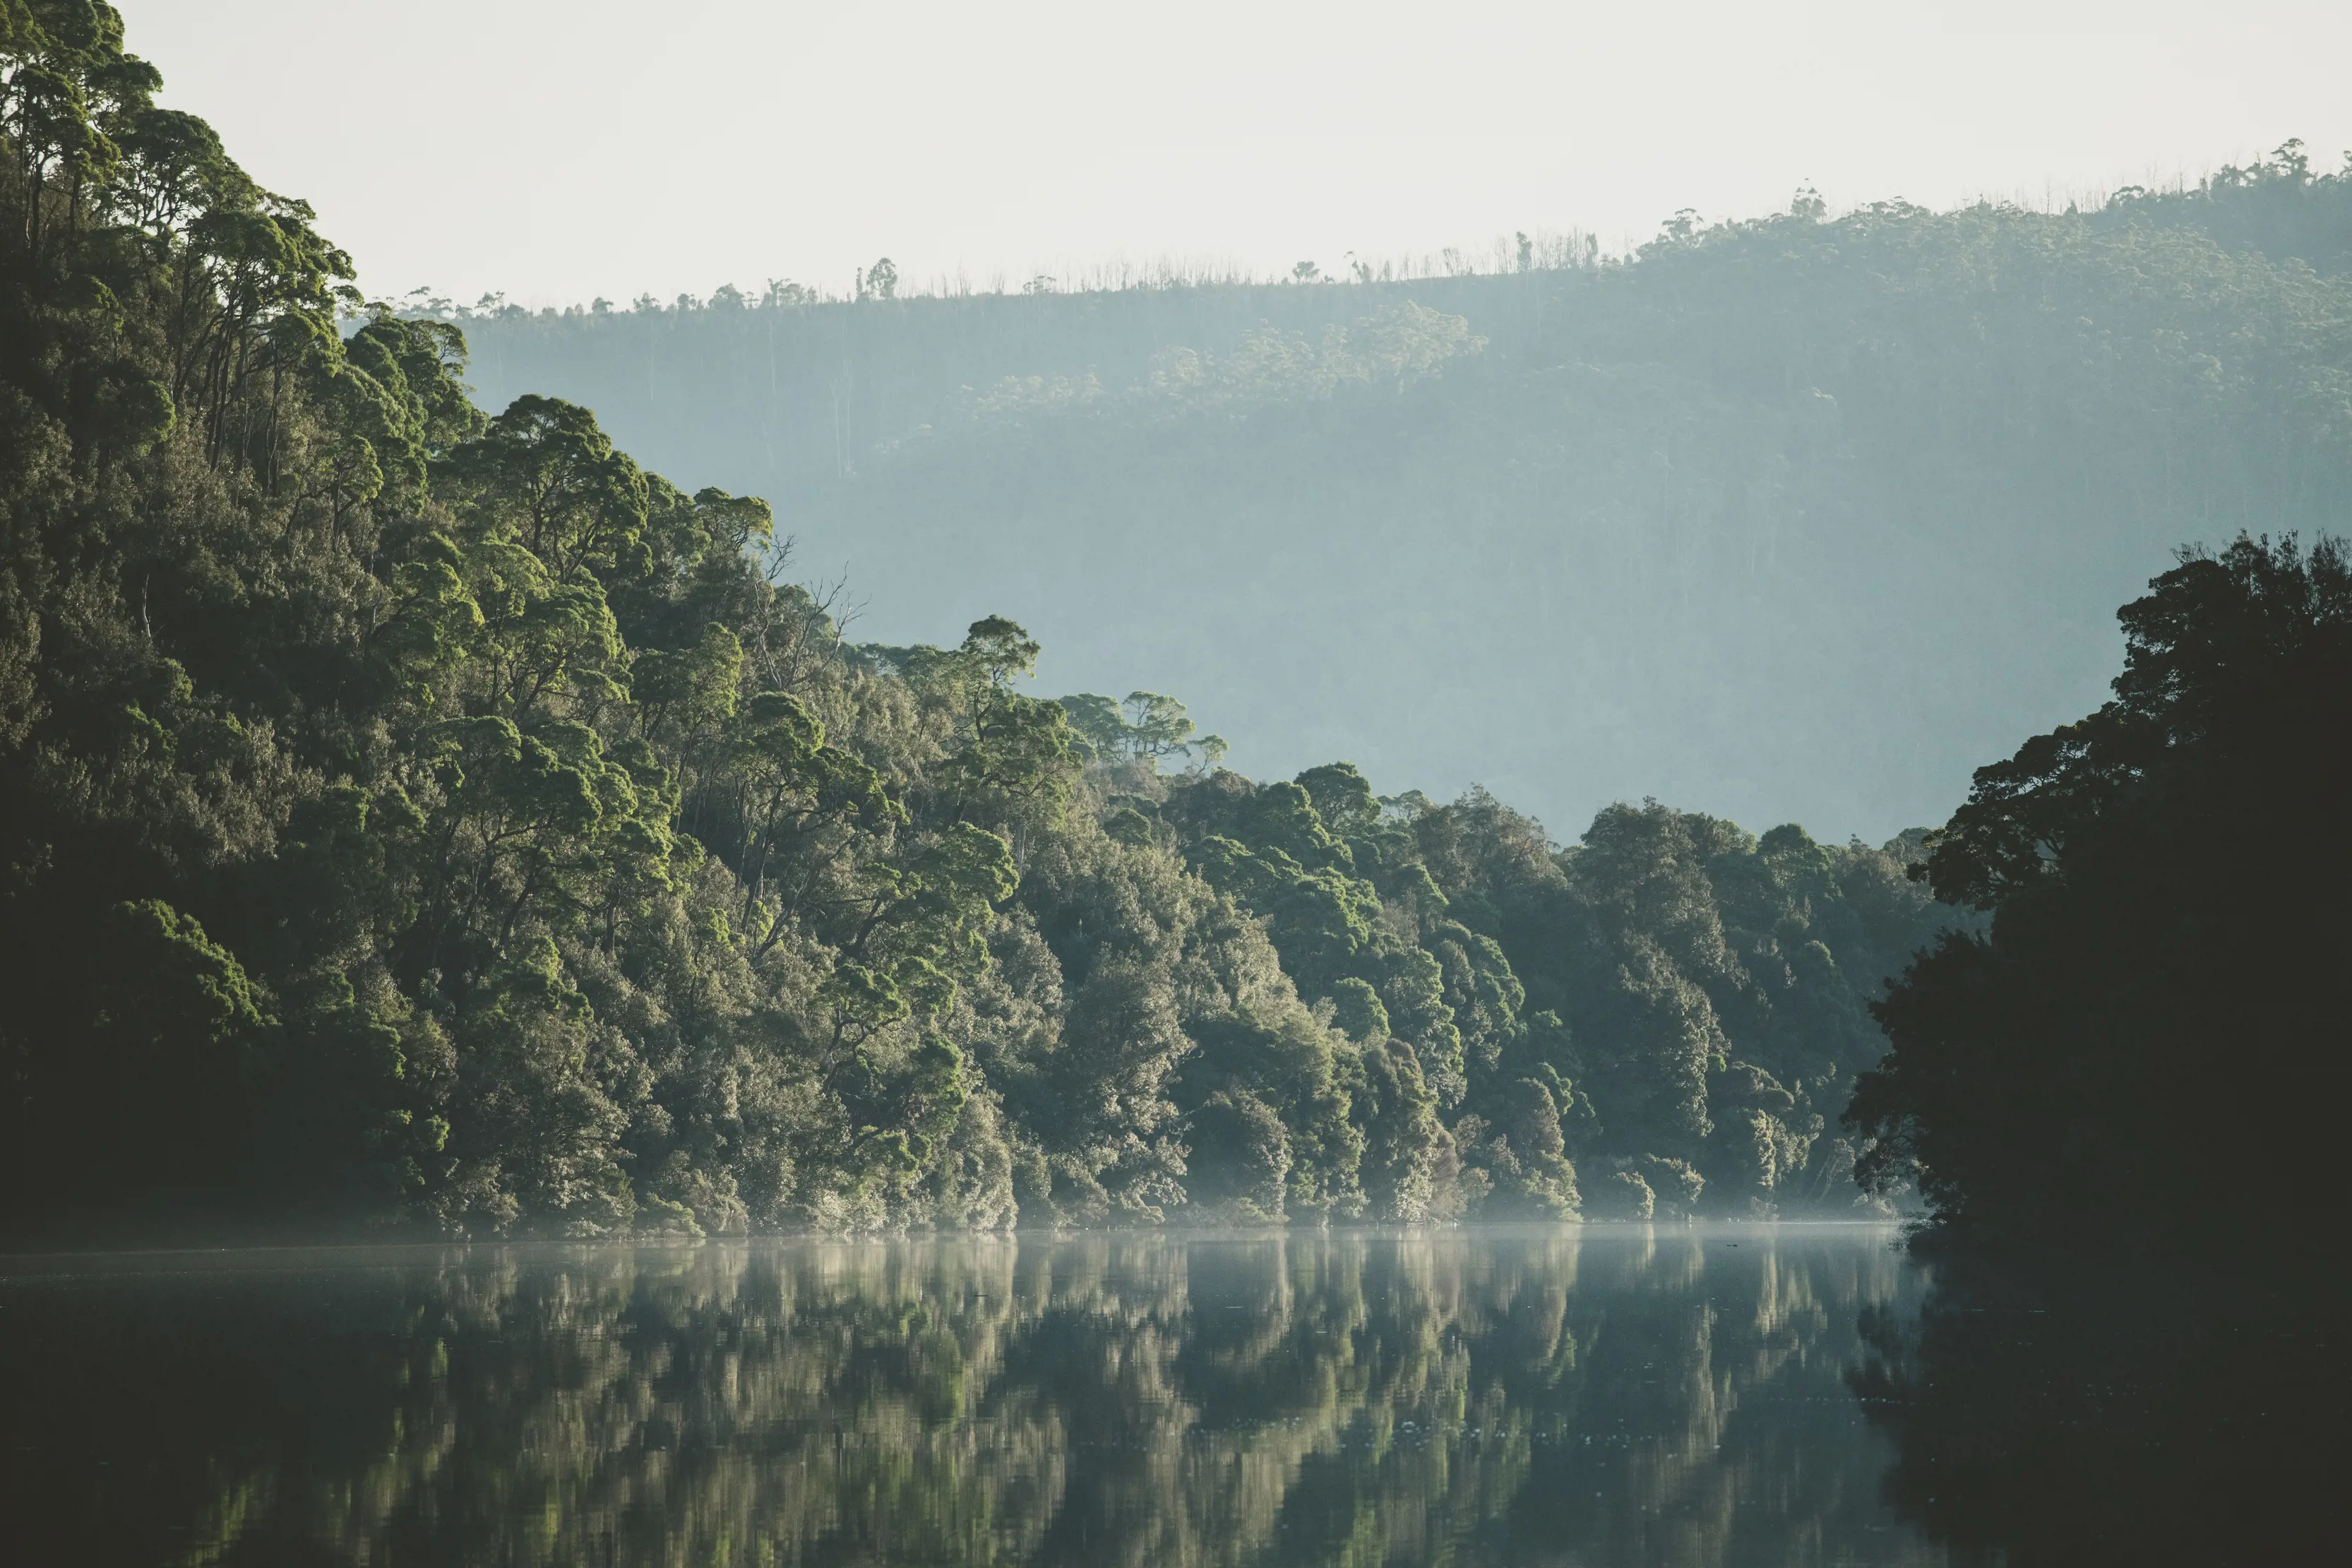 A moody and stunning image of Pieman River. Surrounded by dense rainforest.